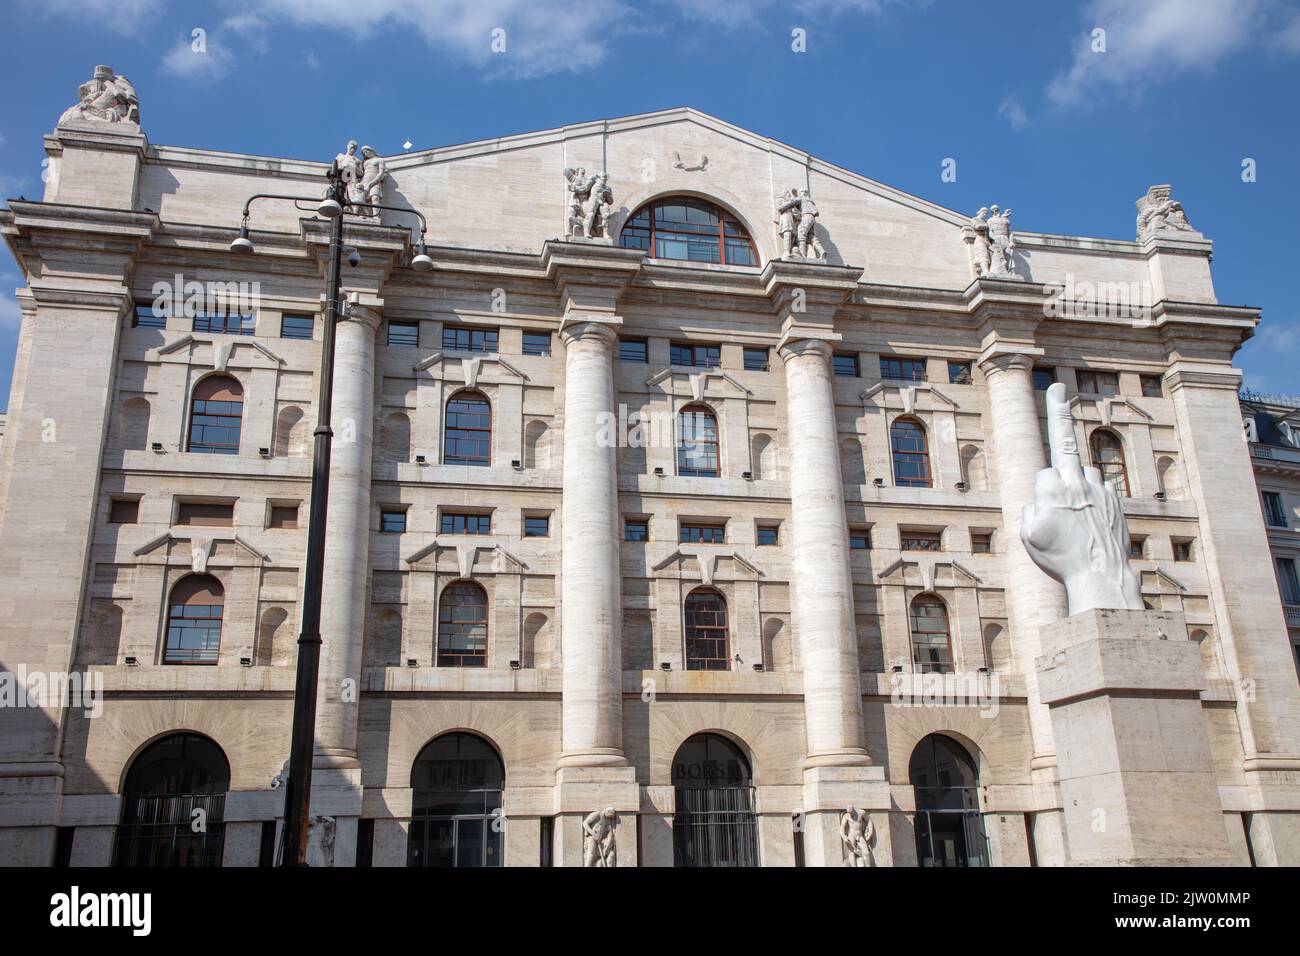 L.O.V.E. Sculpture by Maurizio Cattelan in front of the Milan stock exchange, Milan, Italy Stock Photo